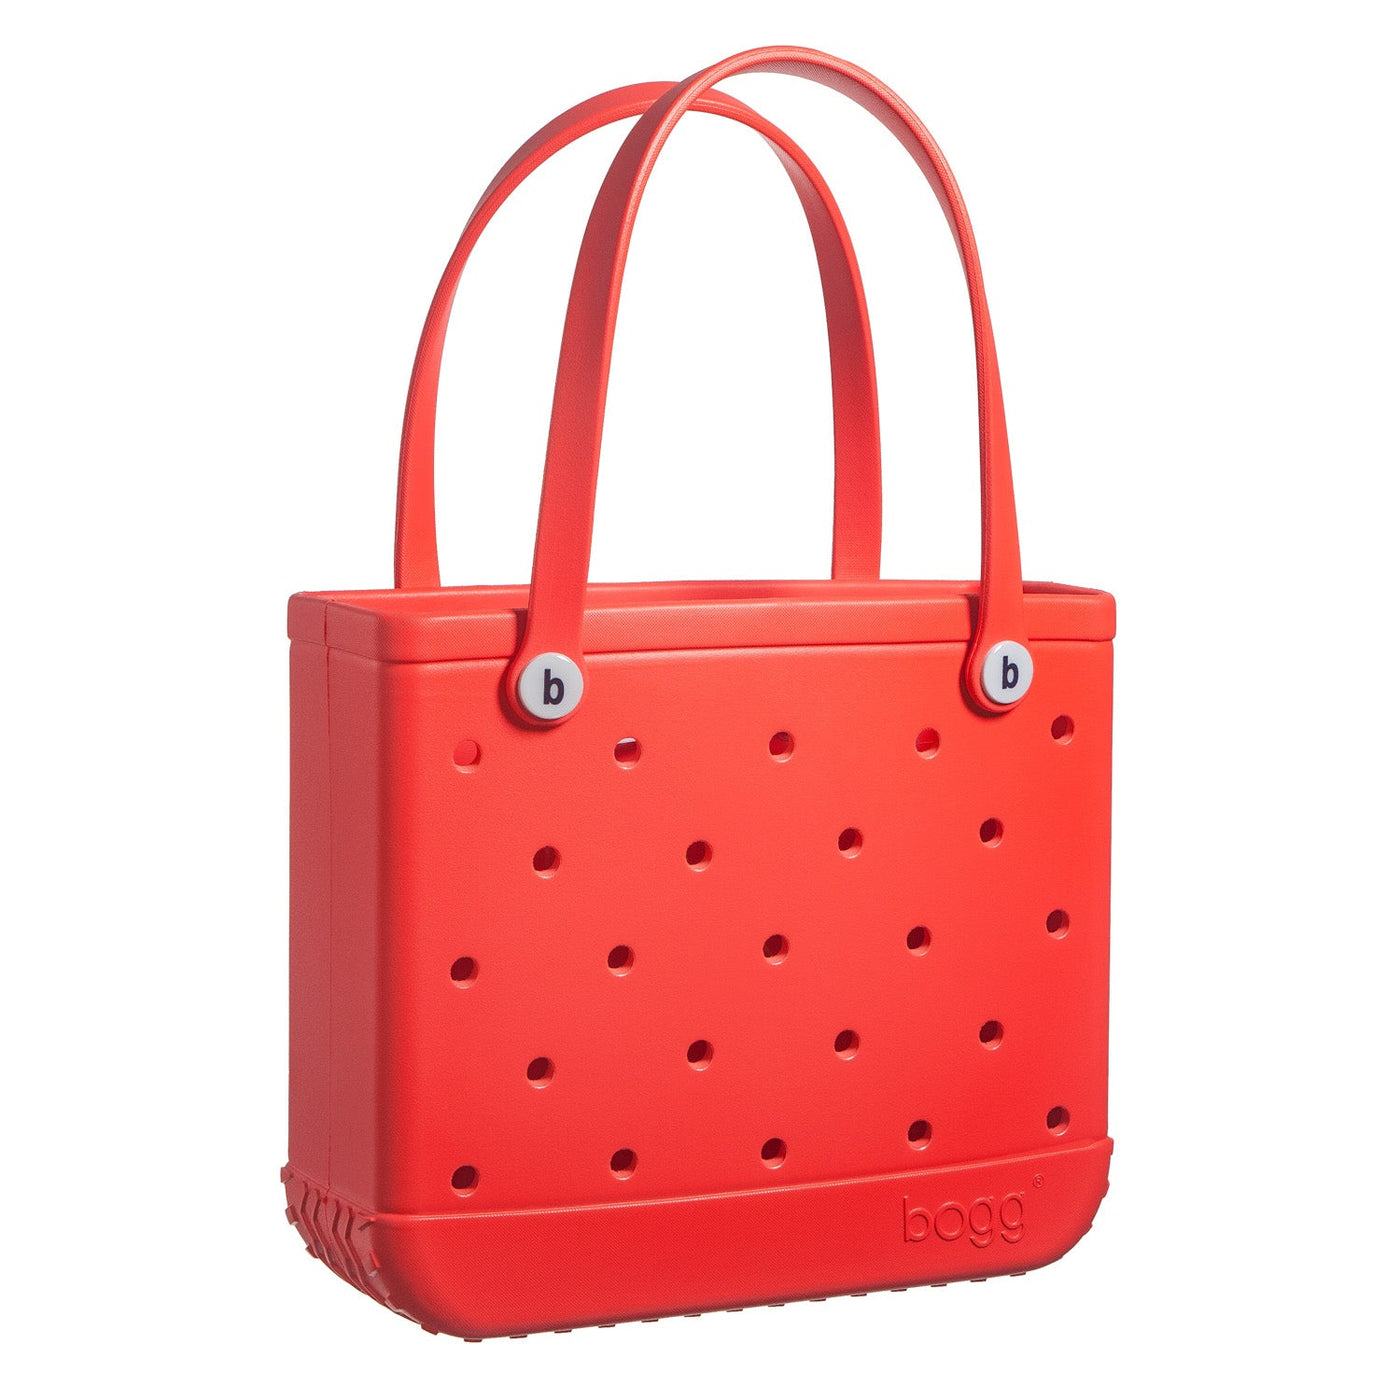 Baby Bogg Bag - Small Size - CORAL Me Mine